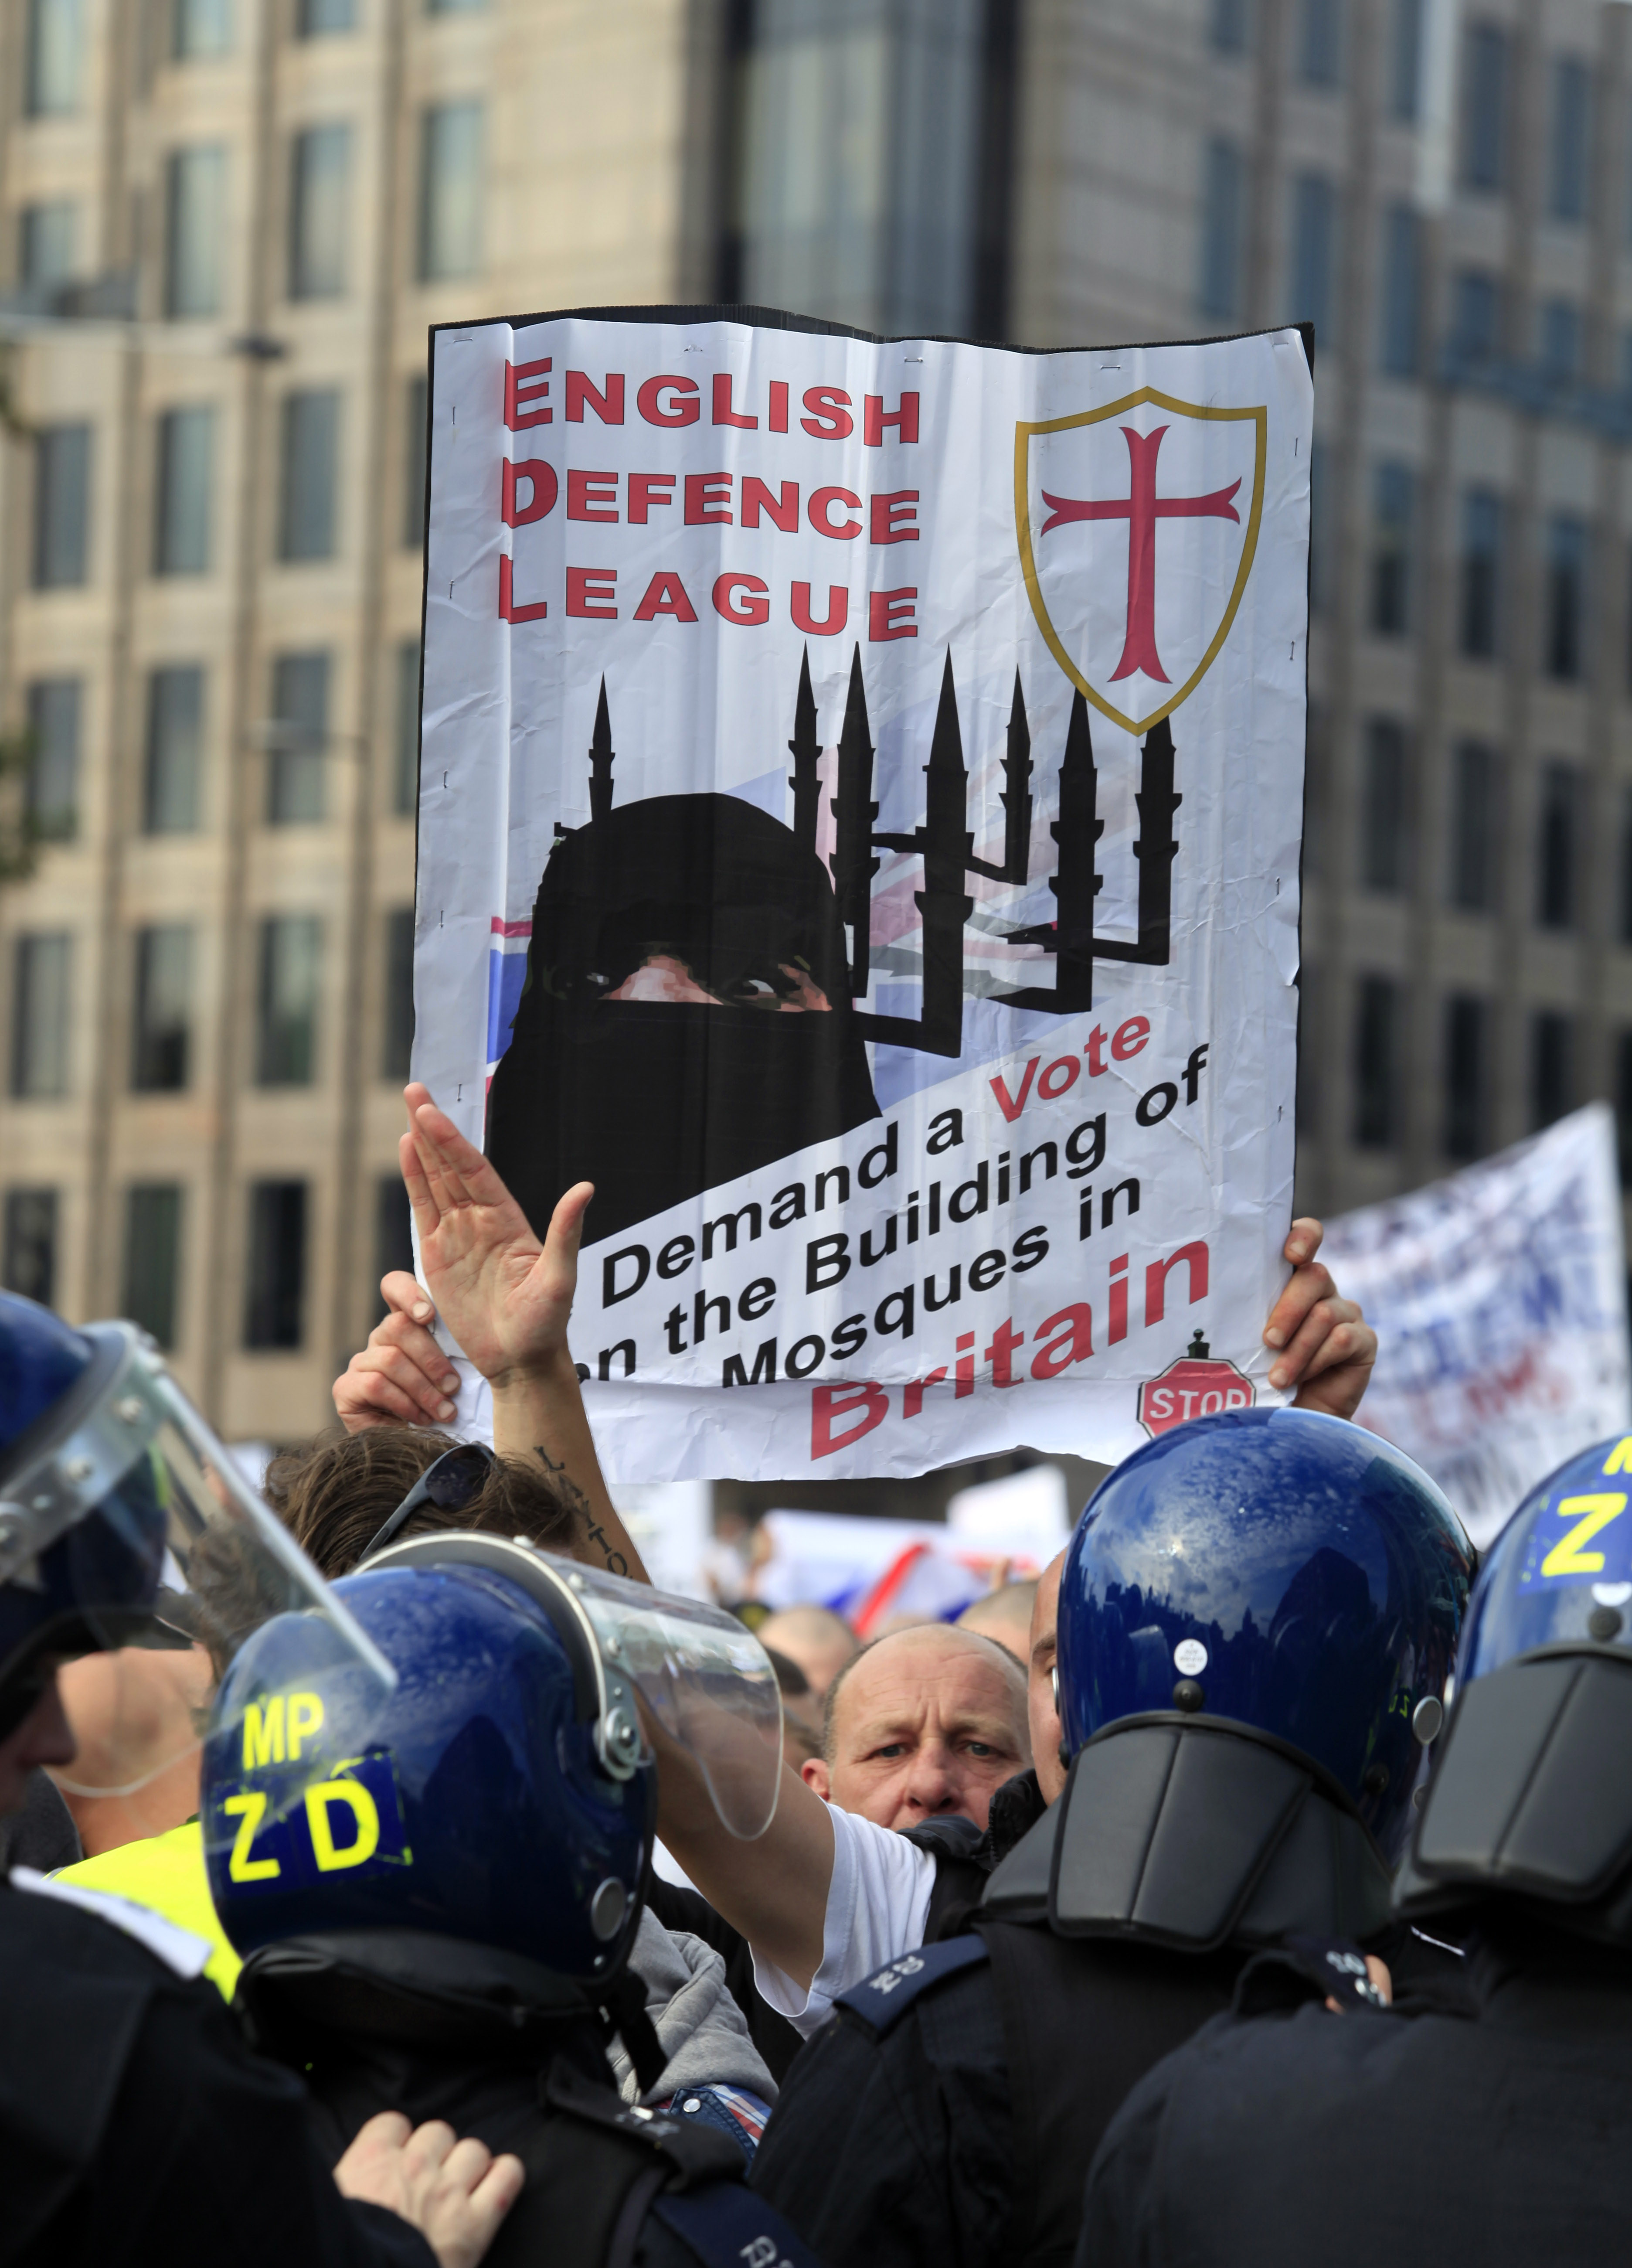 Muslimer, Swedish Defence League, Högerextrema, English Defence League, Demonstration, Protester